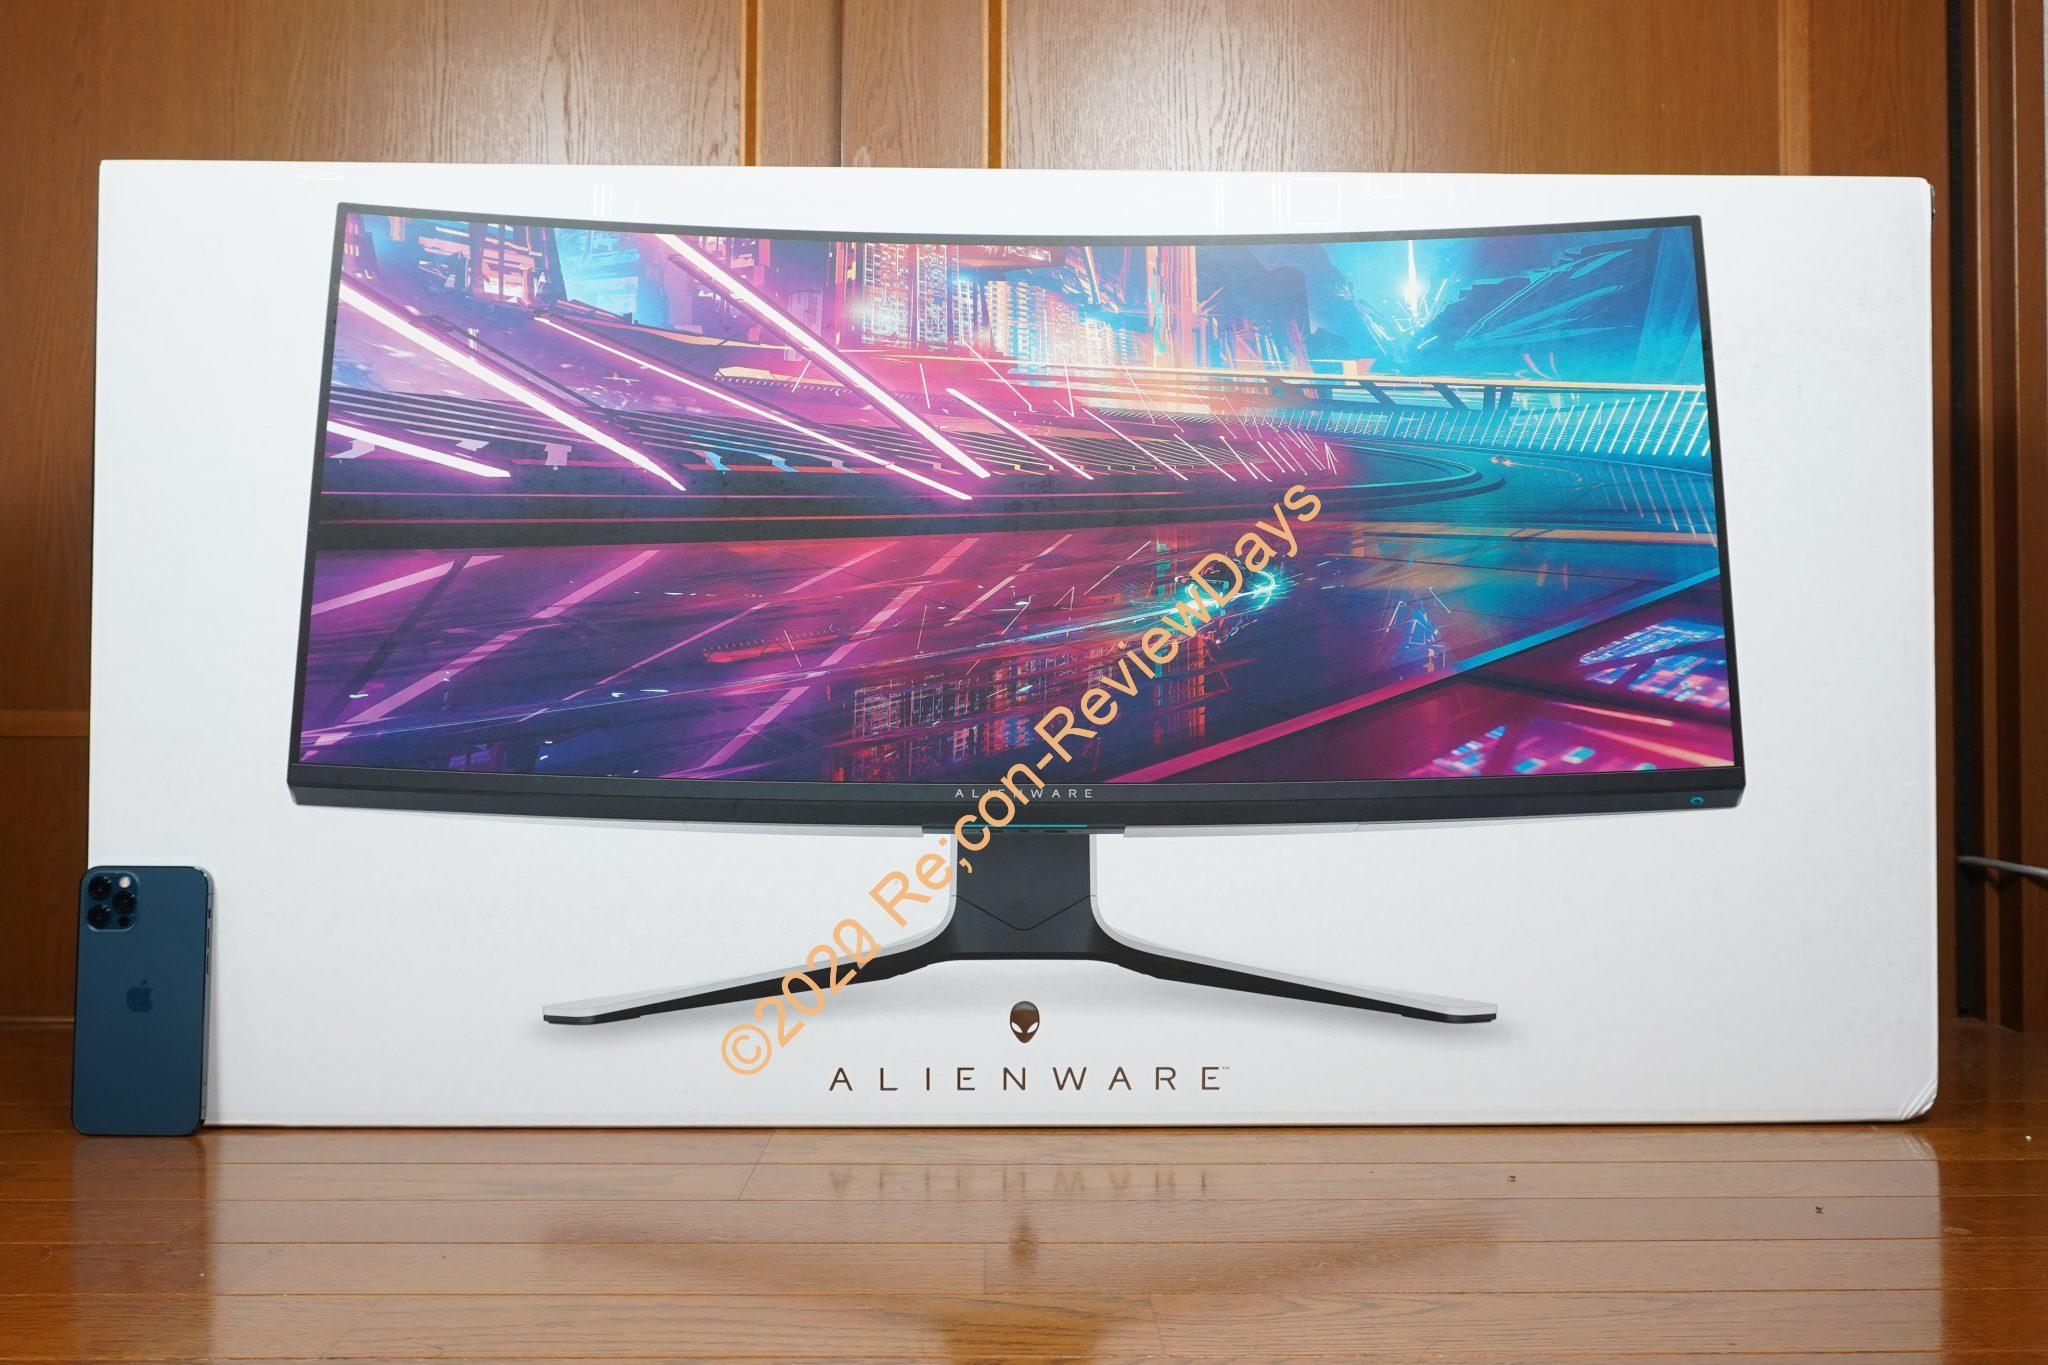 DELL Alienware AW3821DWが突然届きました #DELL #Alienware #AW3821DW 